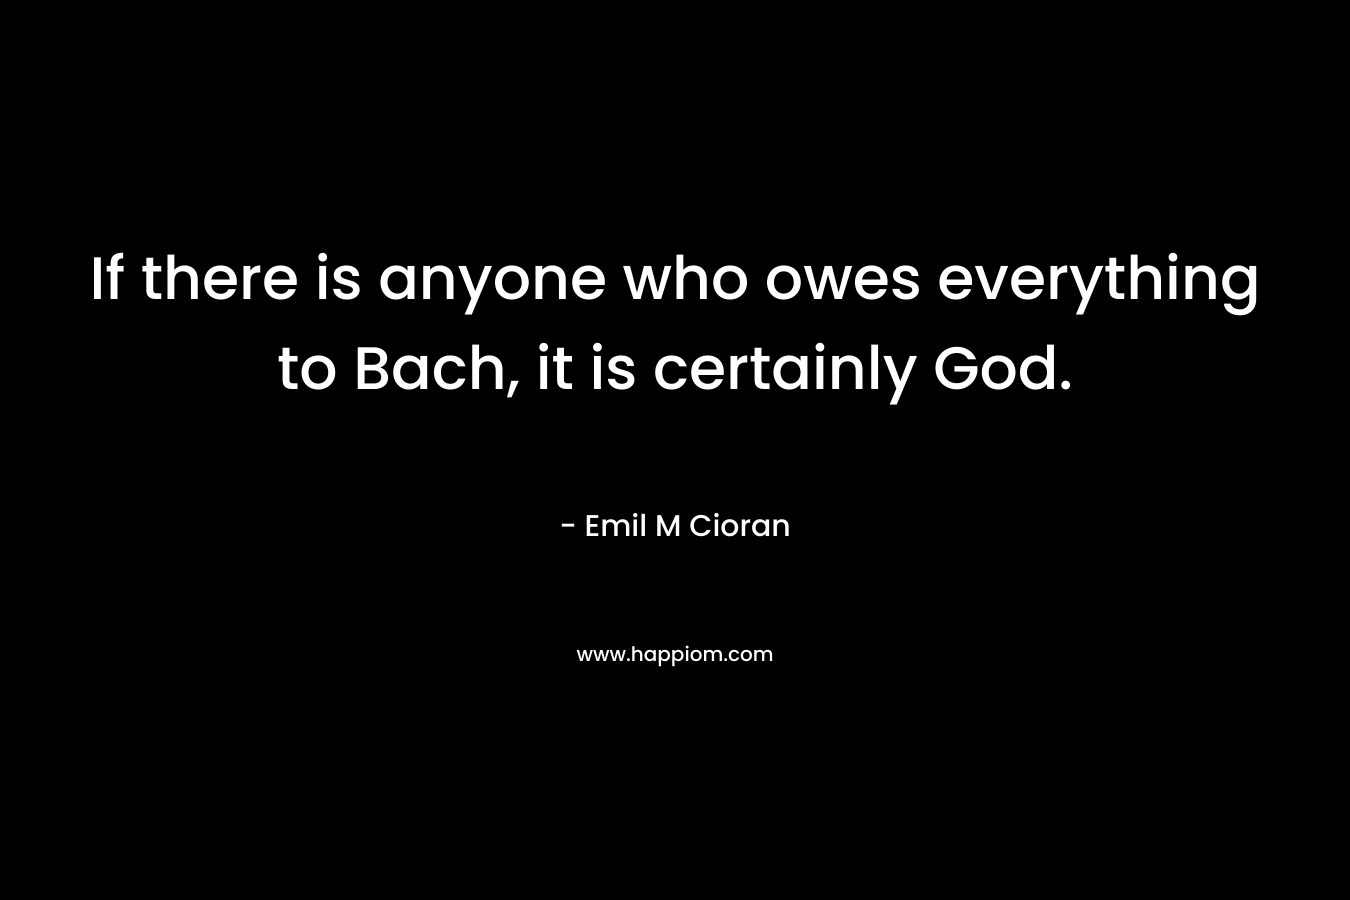 If there is anyone who owes everything to Bach, it is certainly God.